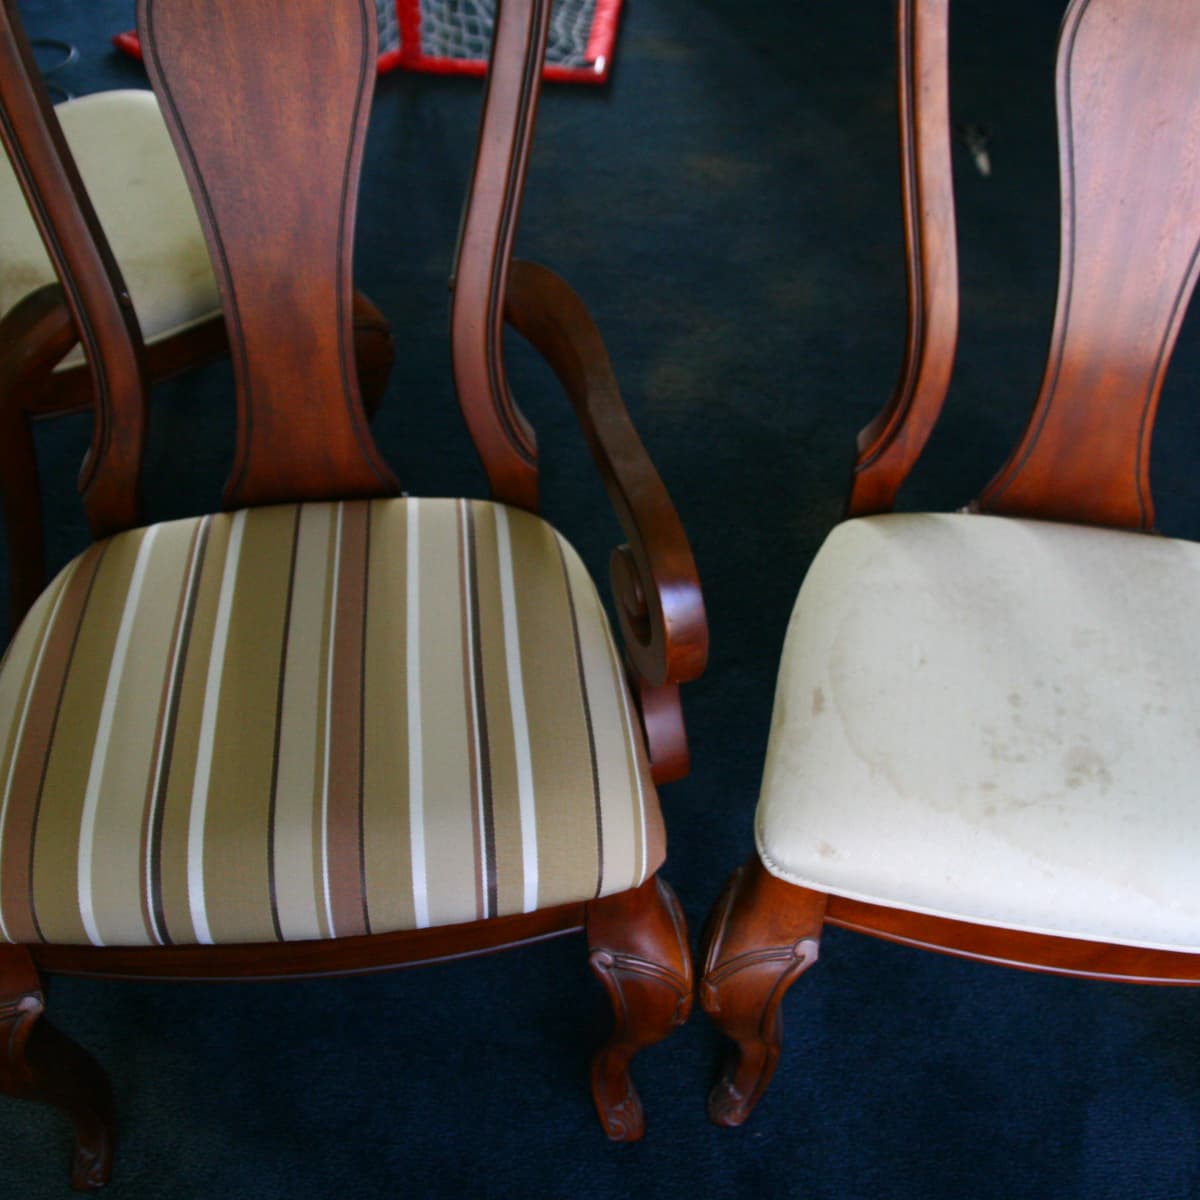 How To Reupholster A Dining Room Chair, How Much Does It Cost To Recover A Dining Room Chair